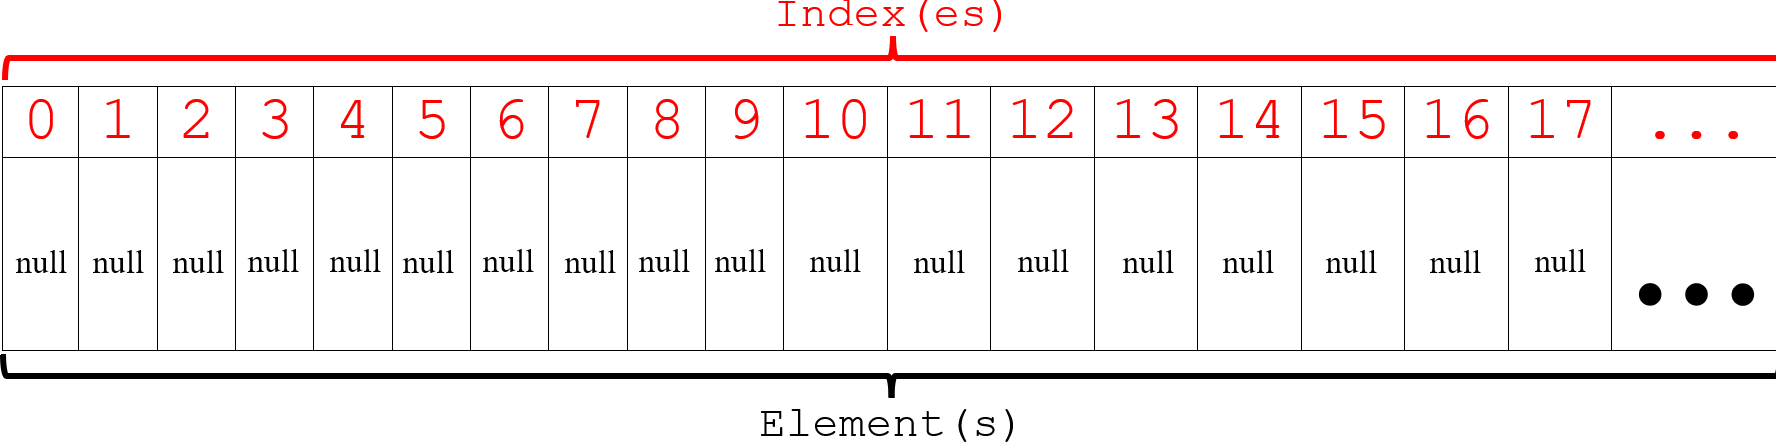 Array (or ArrayList) structure with its content(s) and index(es)